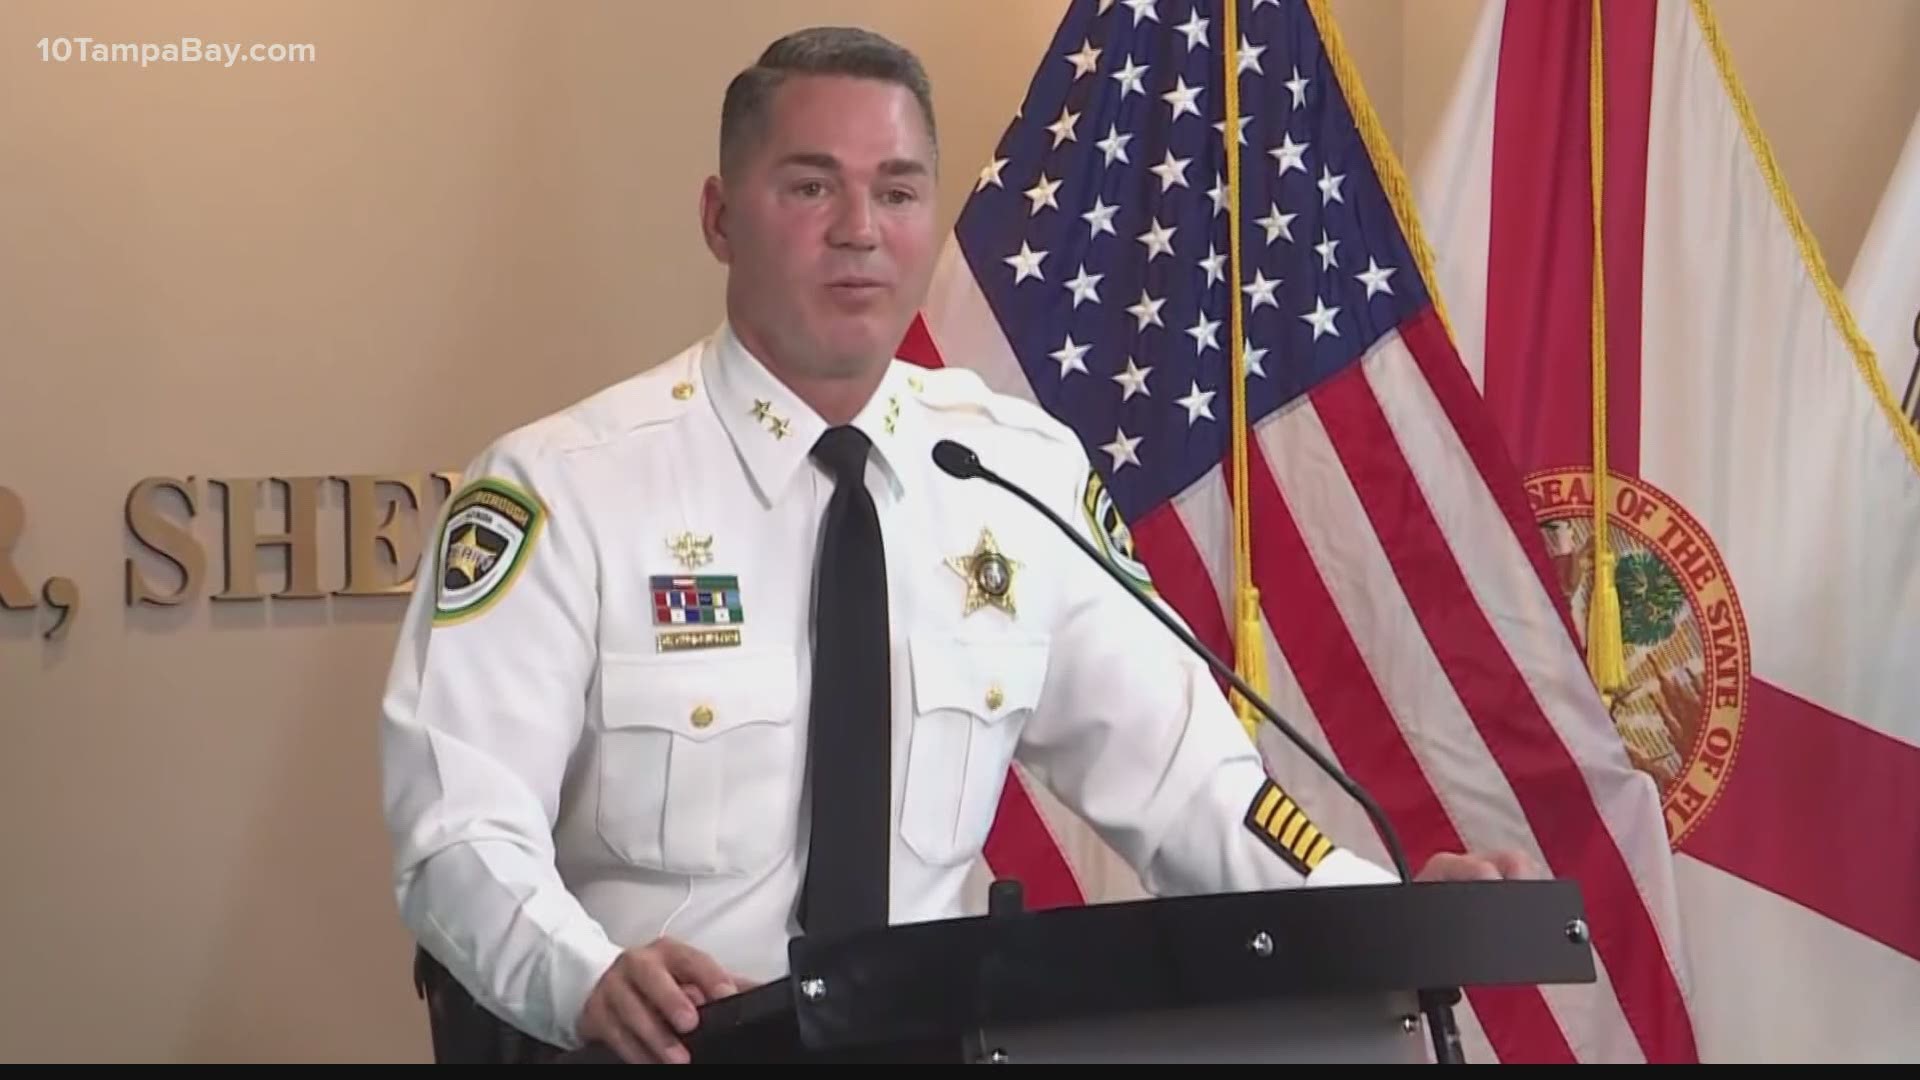 Sheriff Chad Chronister says the squad has seen early success since its launch about a month ago.